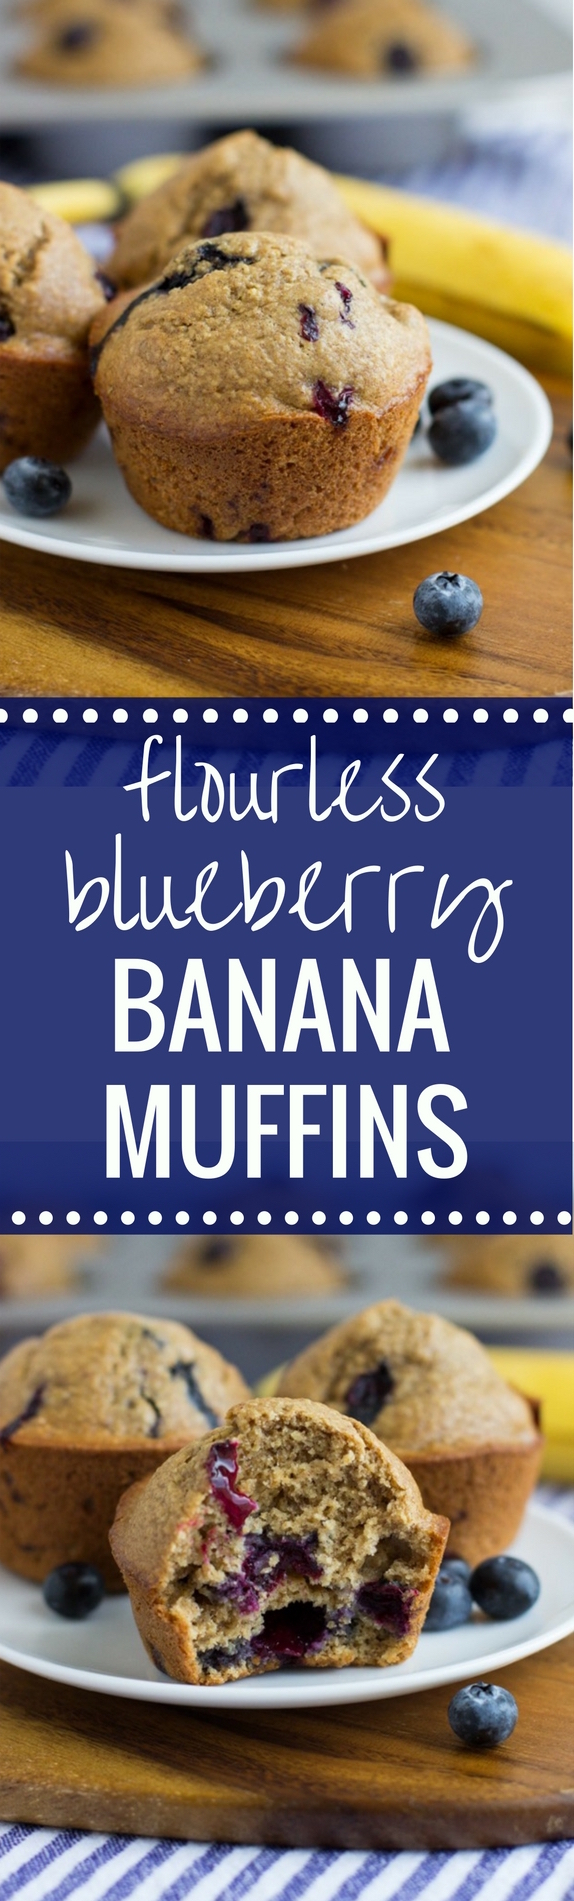 Flourless Blueberry Banana Muffins are a wholesome treat to enjoy for breakfast or a snack. They’re made easy in a blender and are gluten-free, oil-free, dairy-free and refined sugar-free!